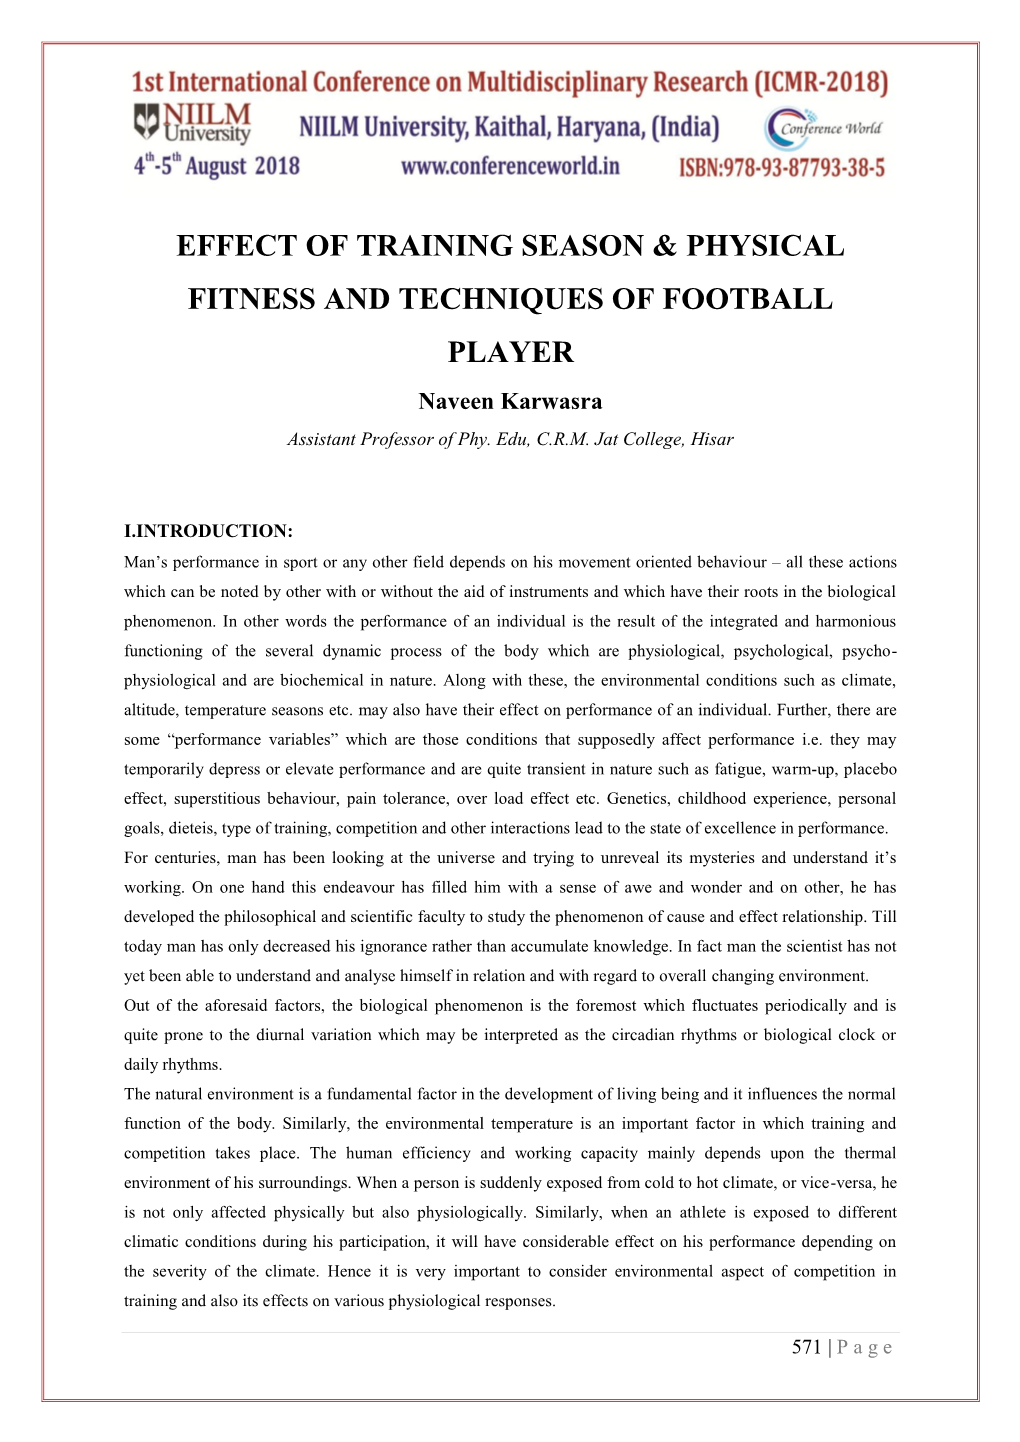 Effect of Training Season & Physical Fitness And